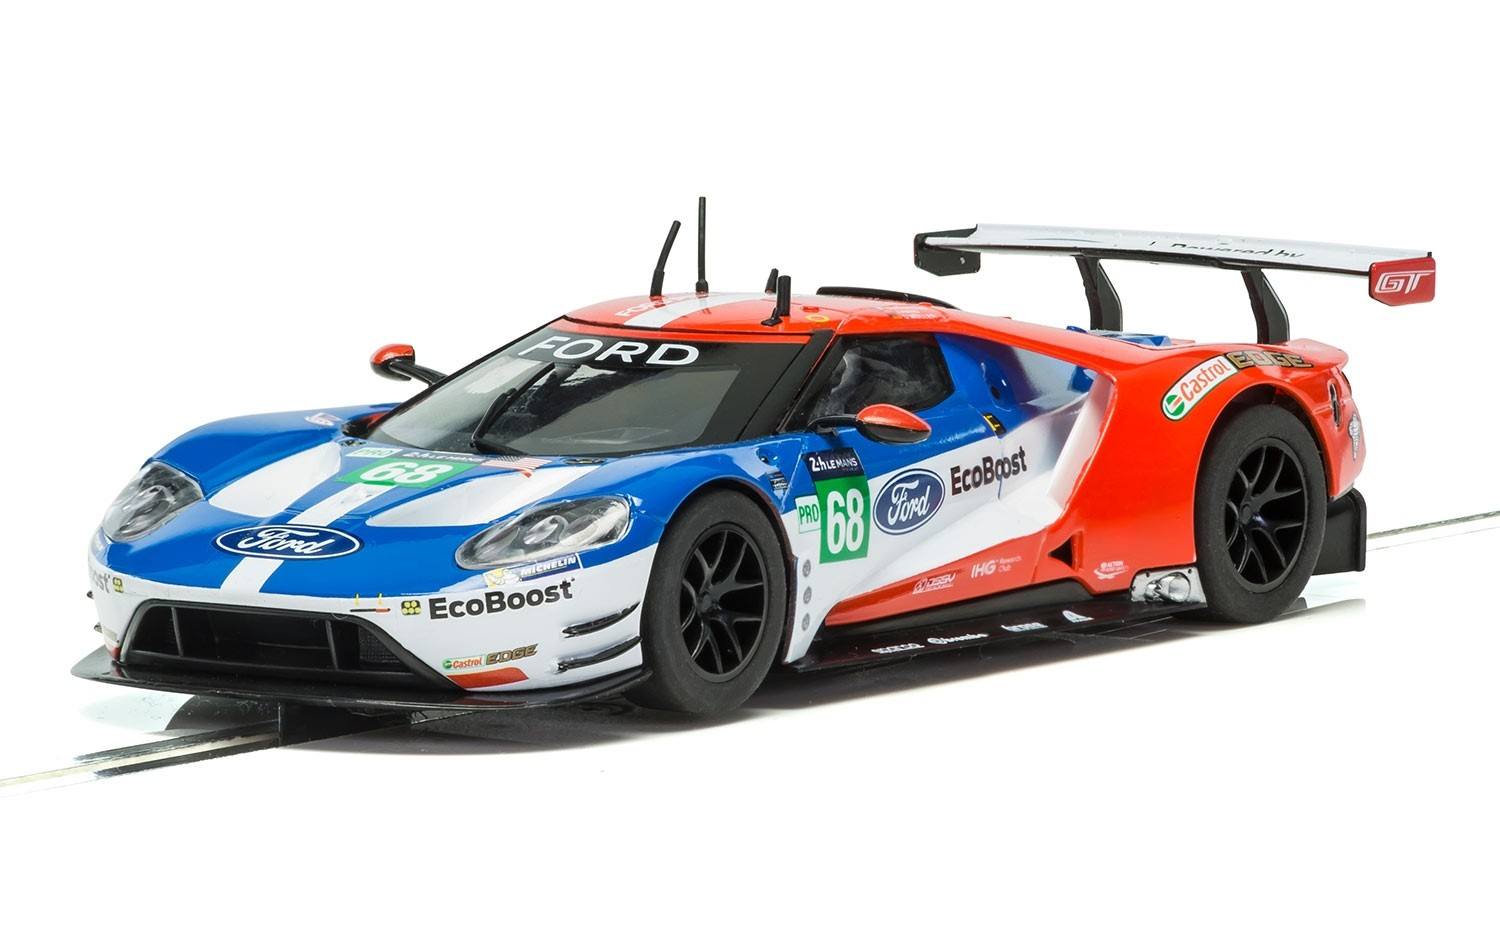 2017 Ford GT #68 Le Mans Scalextric 1/32 Slot Car